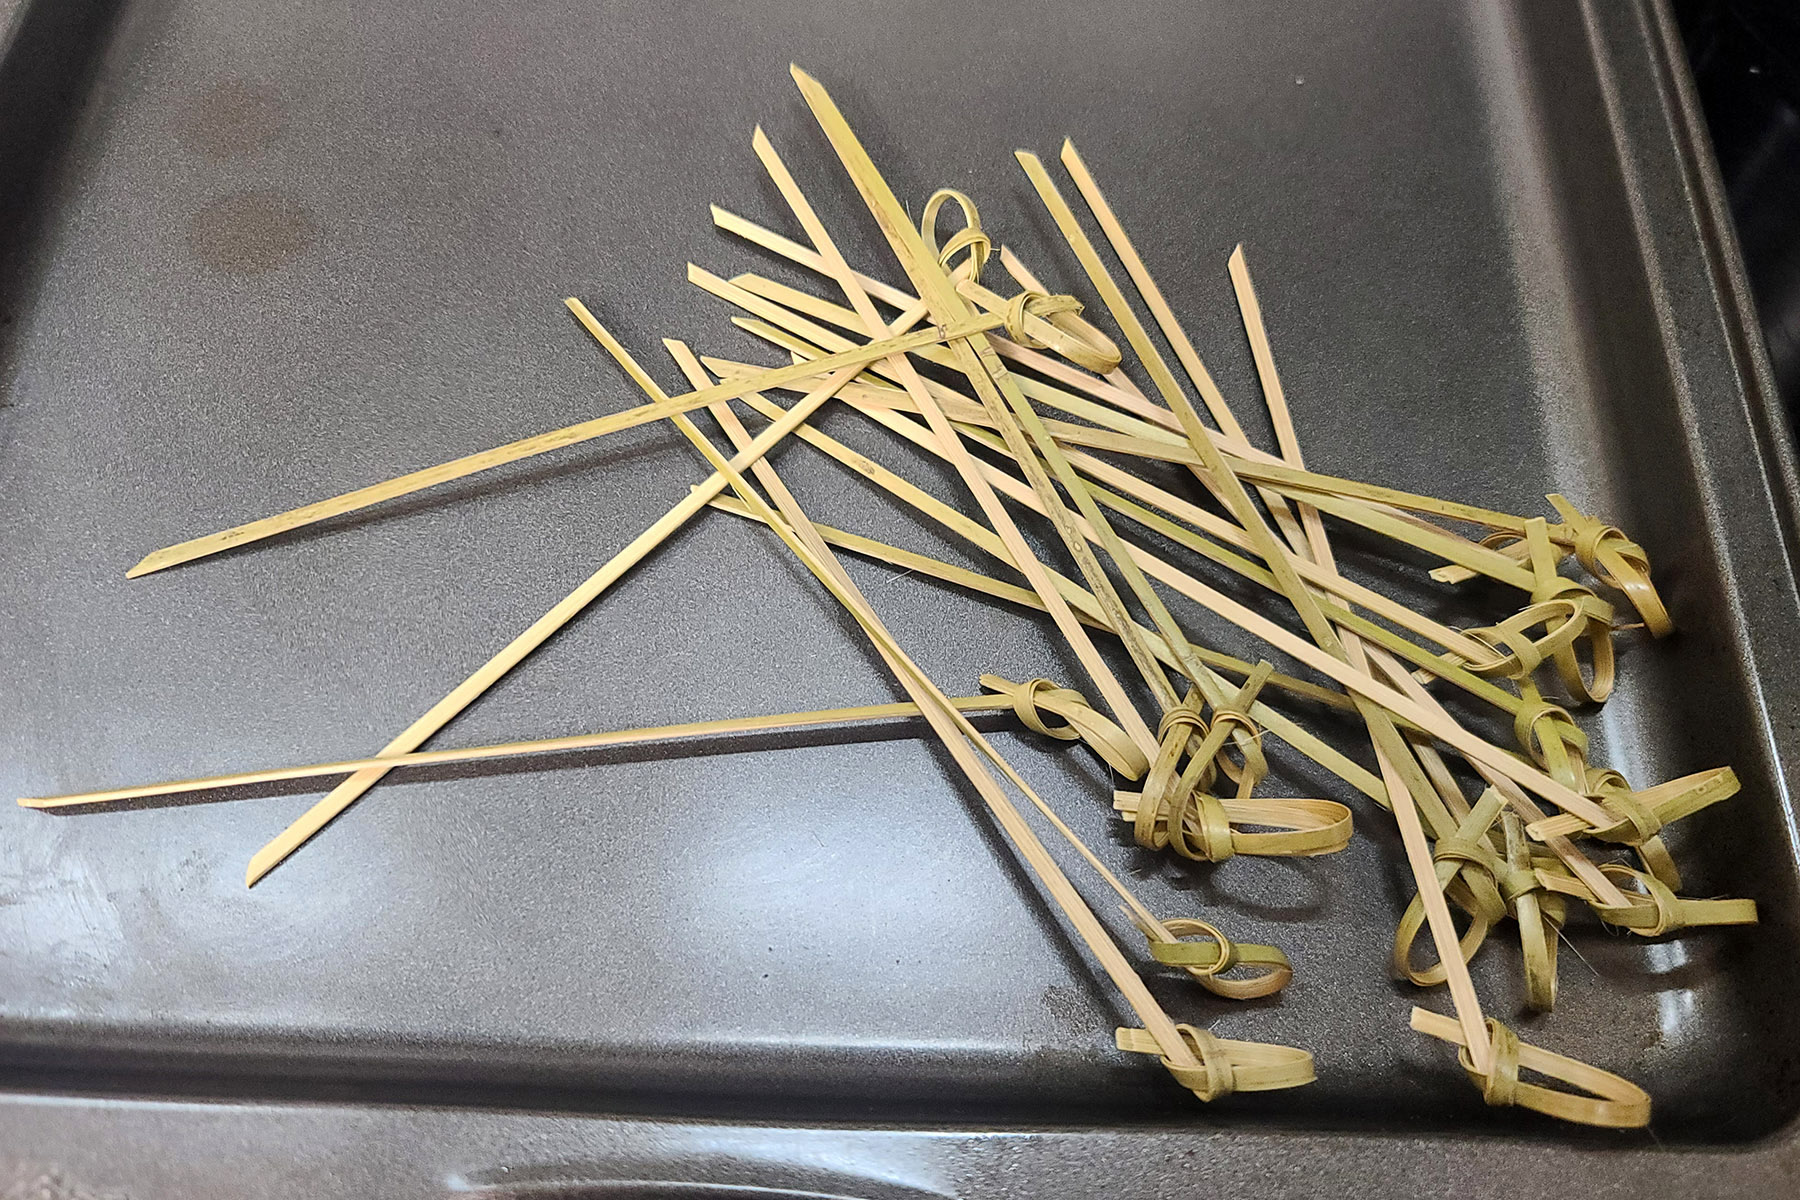 A small pile of bamboo skewers on a pan.